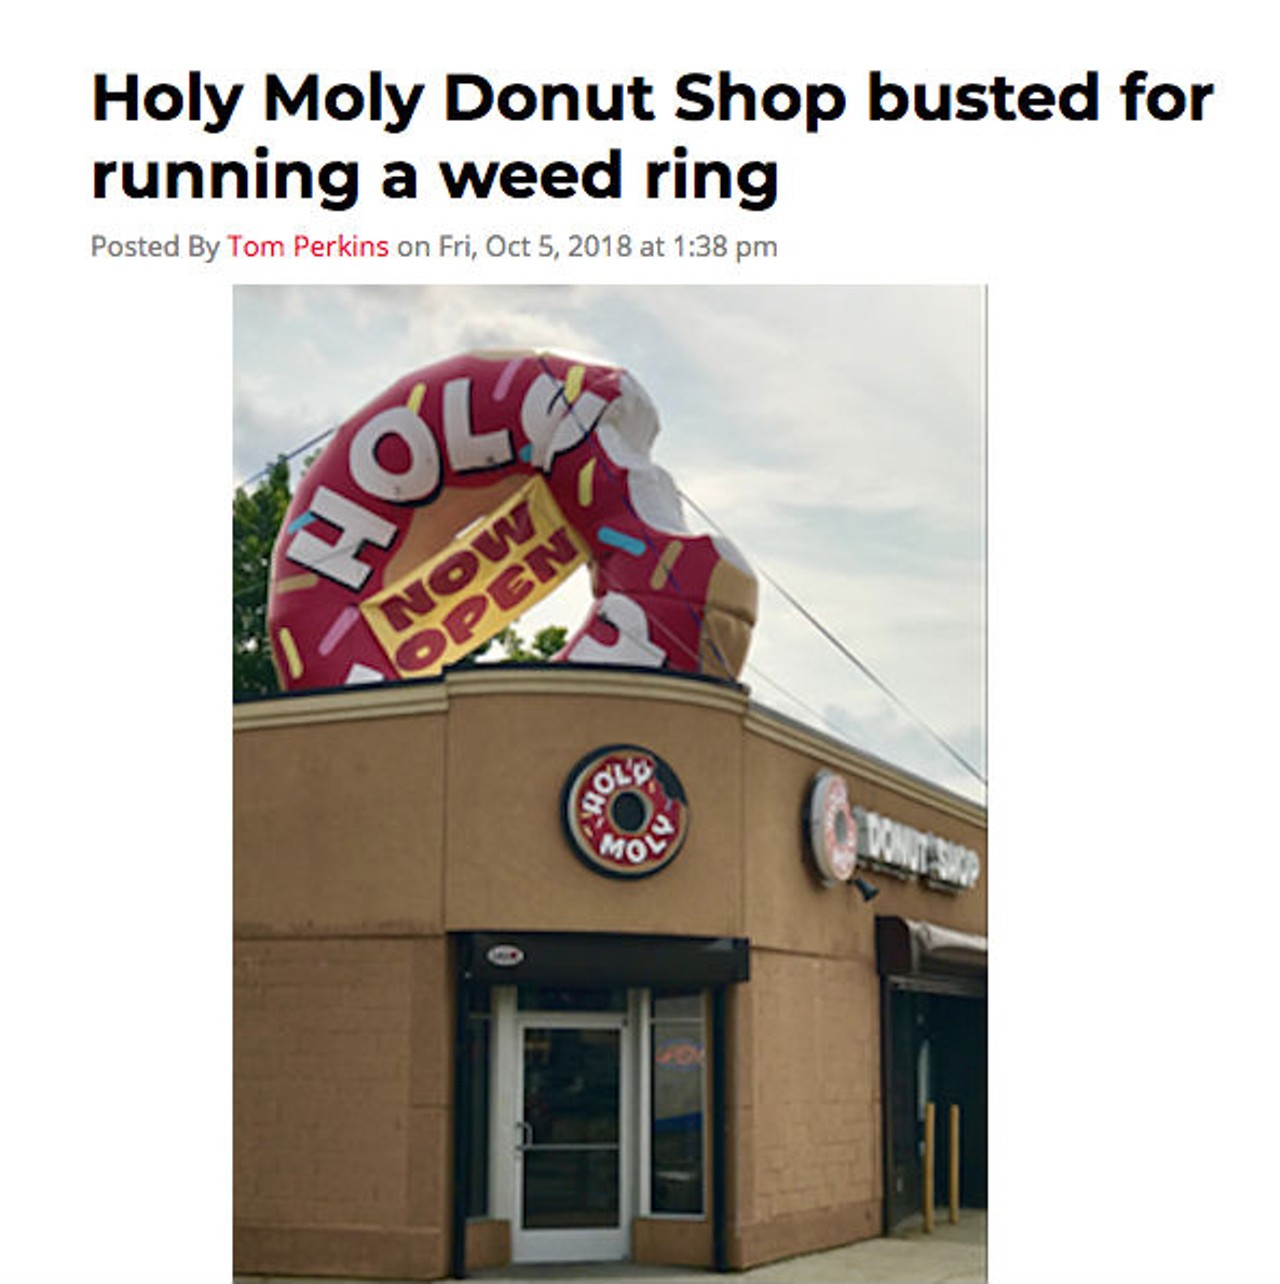 "A donut shop was probably a bad idea since you are almost guaranteed to get cops coming in to buy donuts."
-Brian Kozlowski
You can real the full story here.